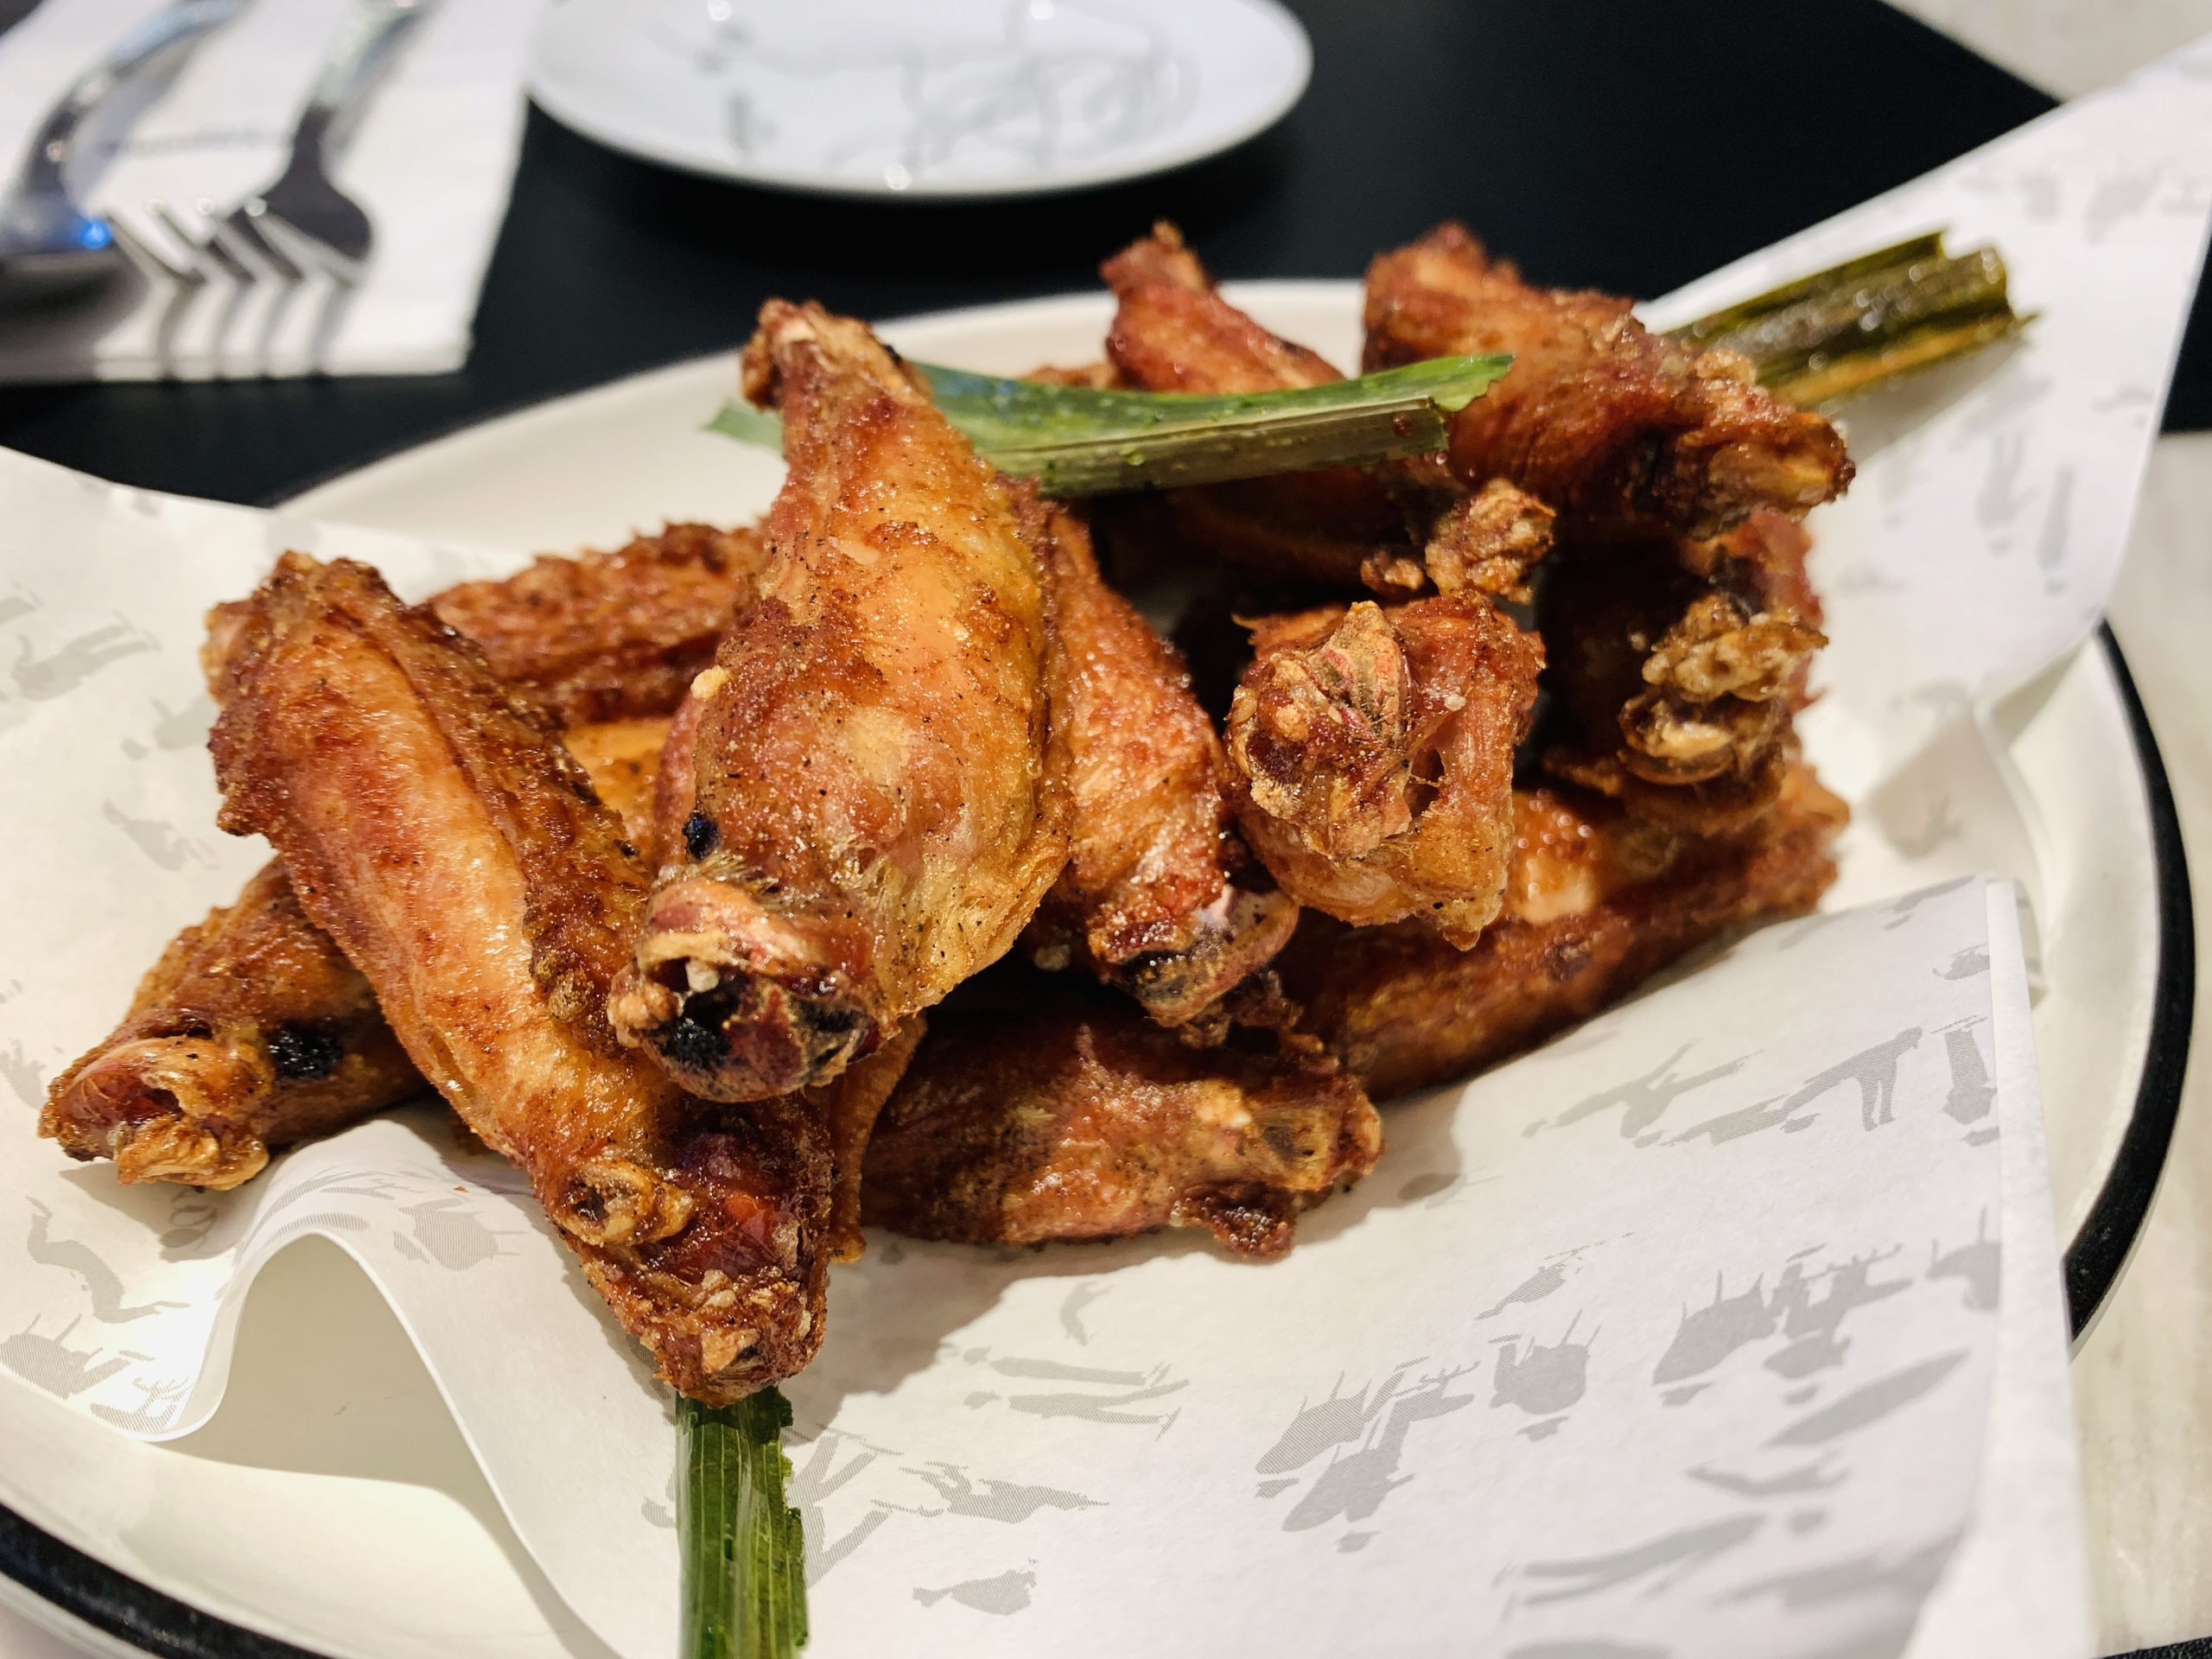 Greyhound Cafe - Greyhound Famous Fried Chicken Wings